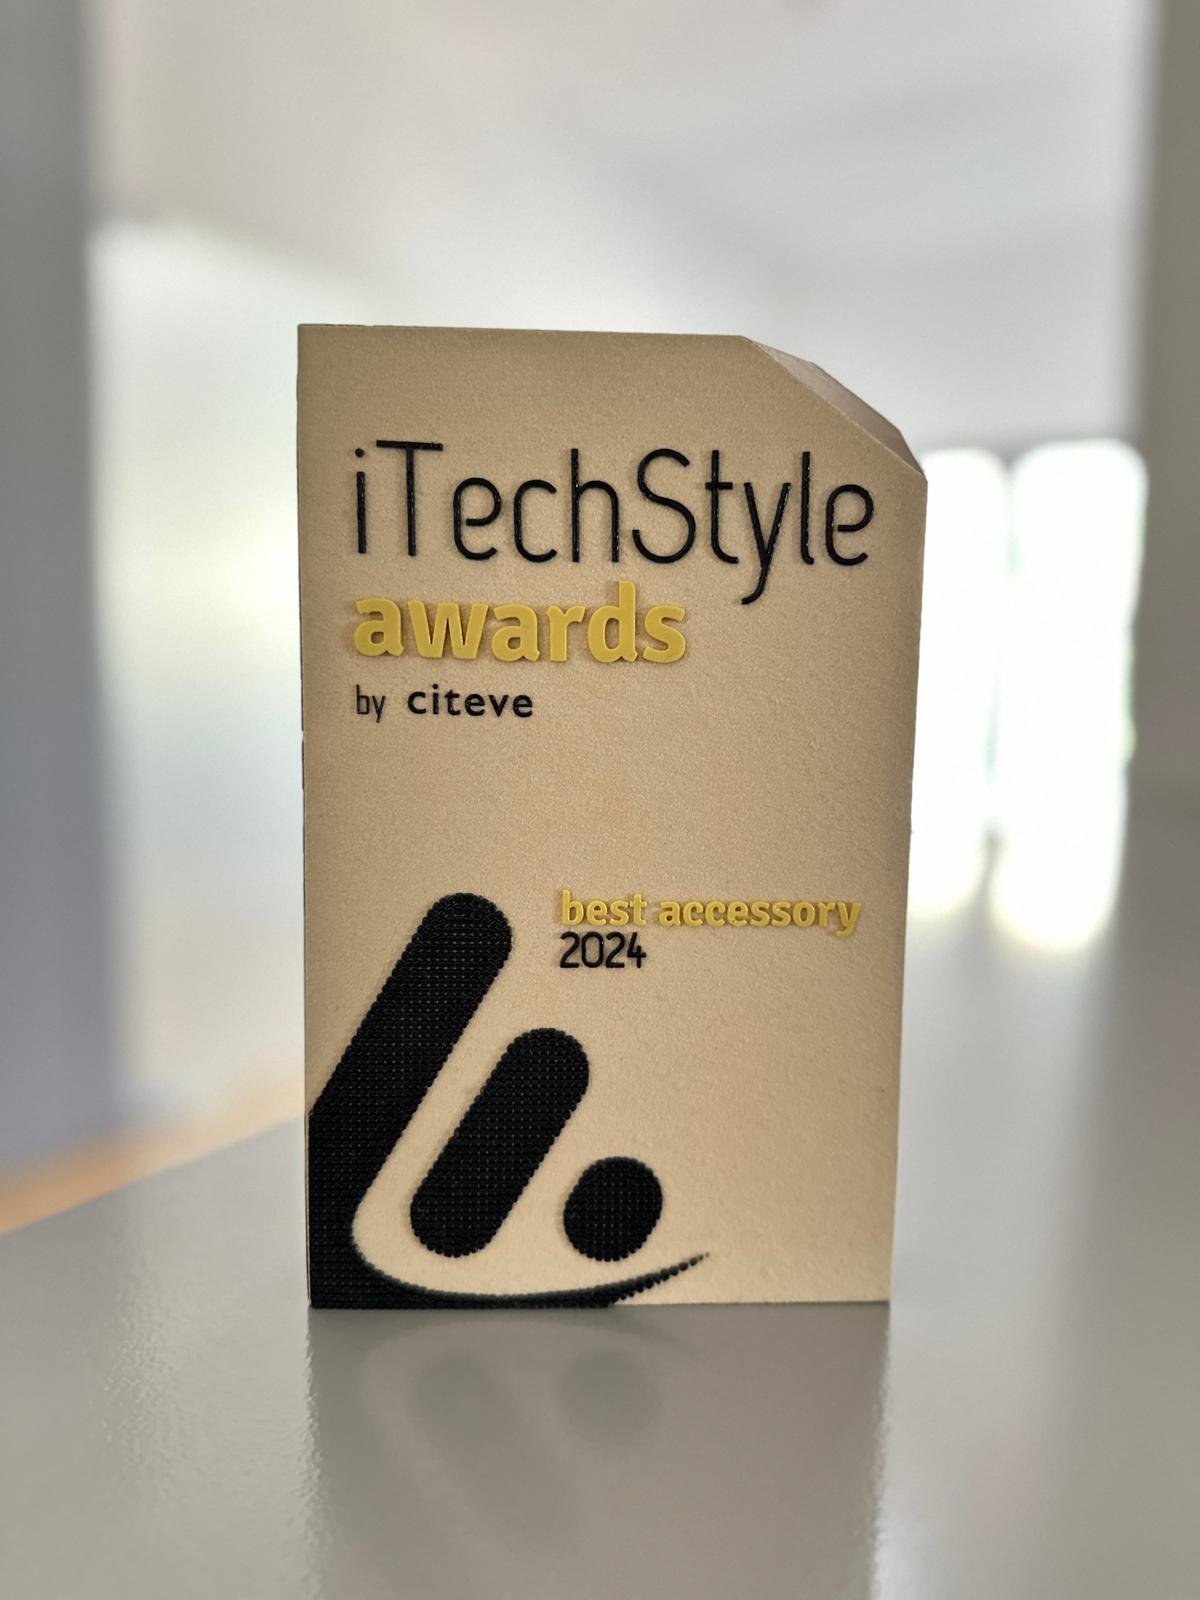 iTechStyle awards by citeve 2024